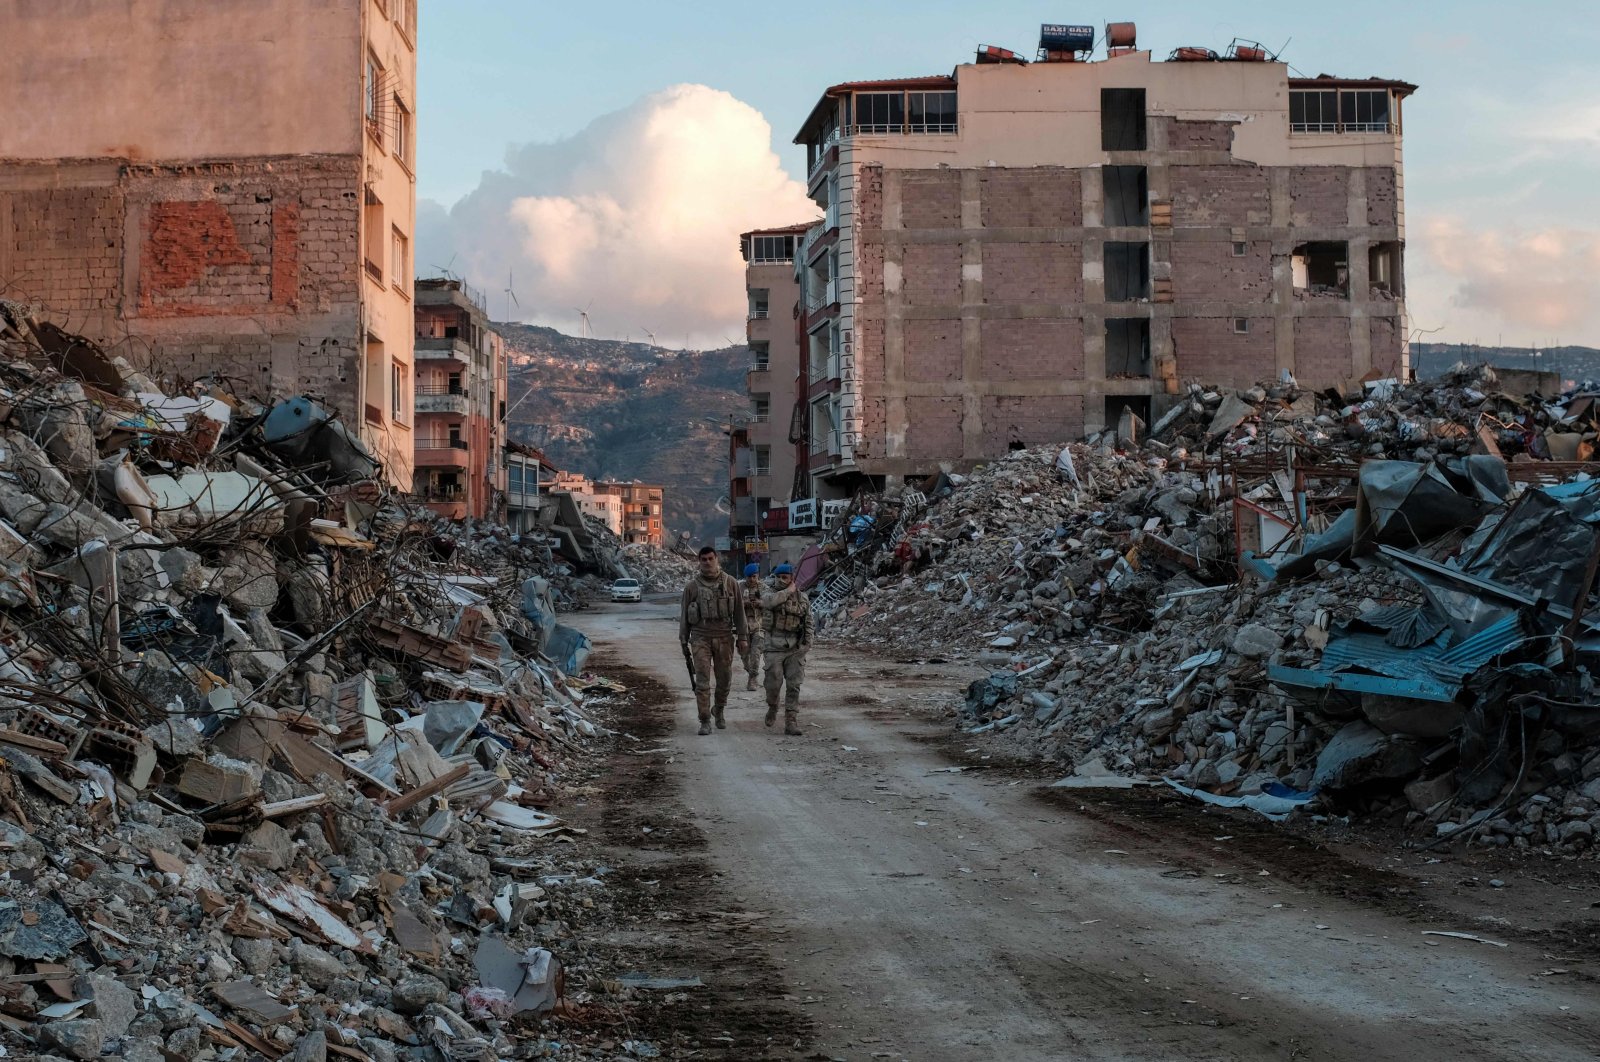 Turkish Armed Forces members walk among collapsed buildings, a day after a 6.4 magnitude earthquake struck the region, in the coastal city of Samandağ, Türkiye, Feb. 21, 2023. (AFP Photo)